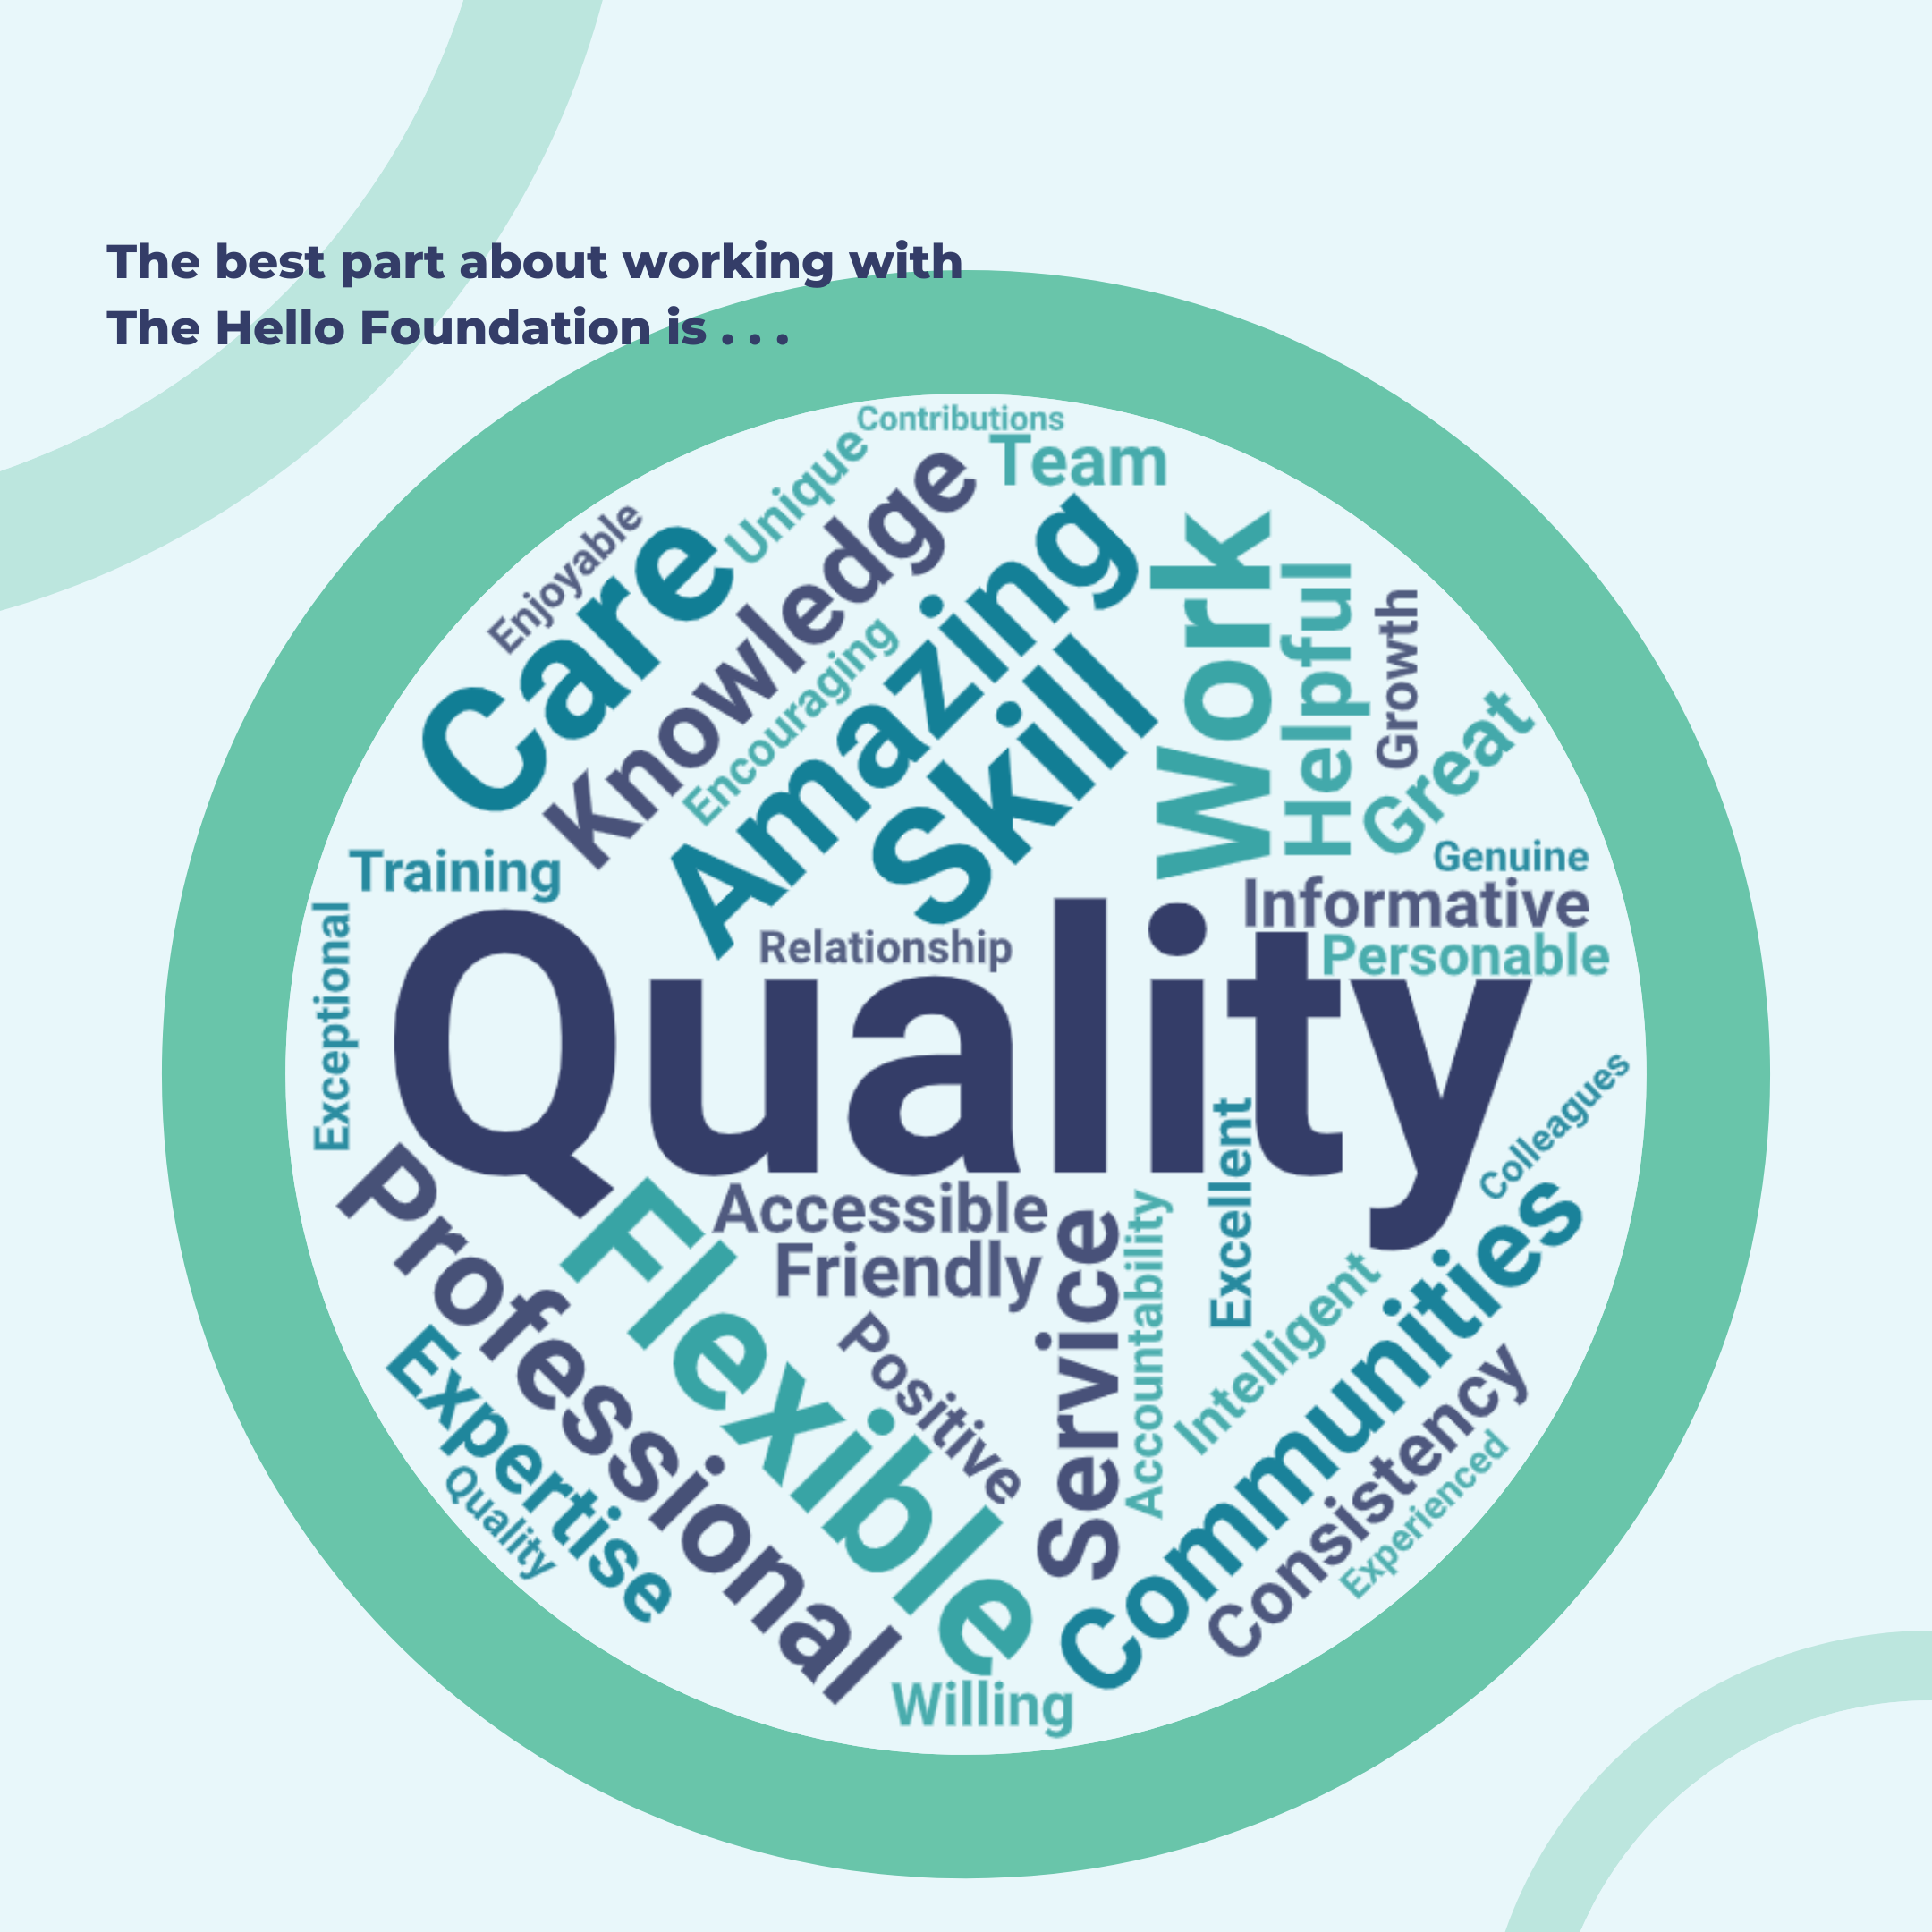 Word cloud inside a circle border; cloud contains the word Quality in large print in the center, also has the words exceptional, professional, expertise, flexible, positive, accessible, friendlly, willing, service, accountability, communities, consistency, experienced, colleagues, personable, informative, genuine, great, growth, helpful, work, skill, knowledge care, unique, team, amazing